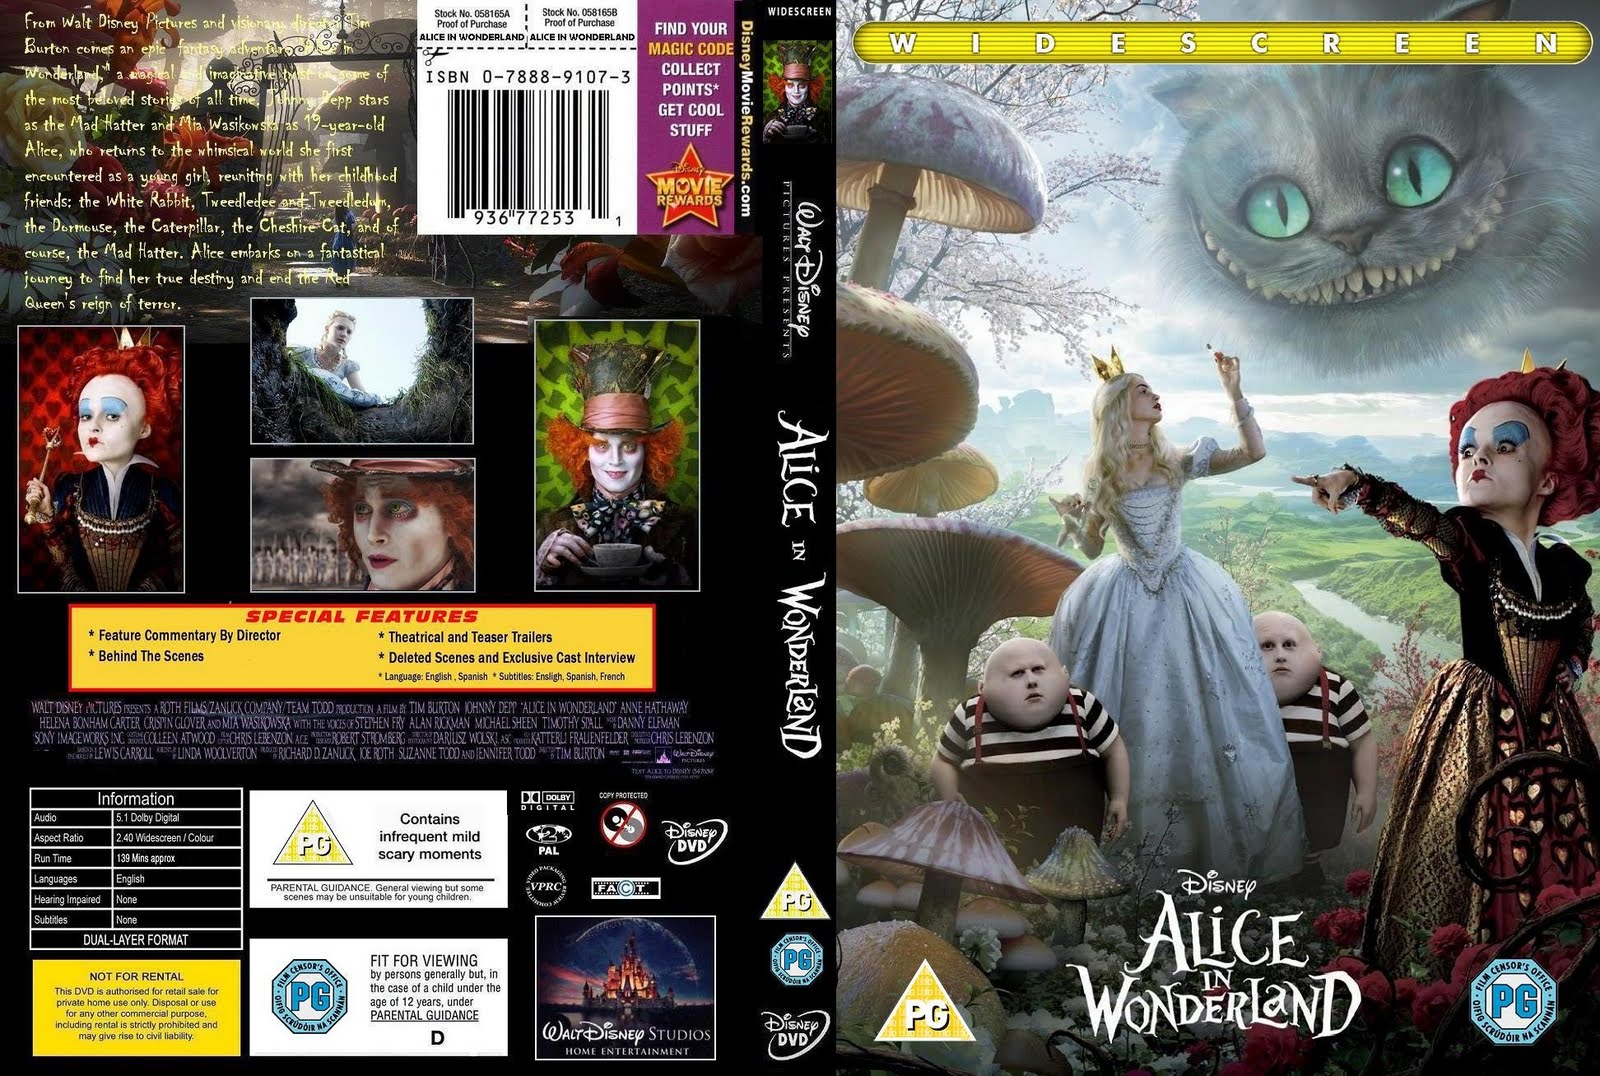 Alice Through the Looking Glass (English) full movie hindi dubbed free